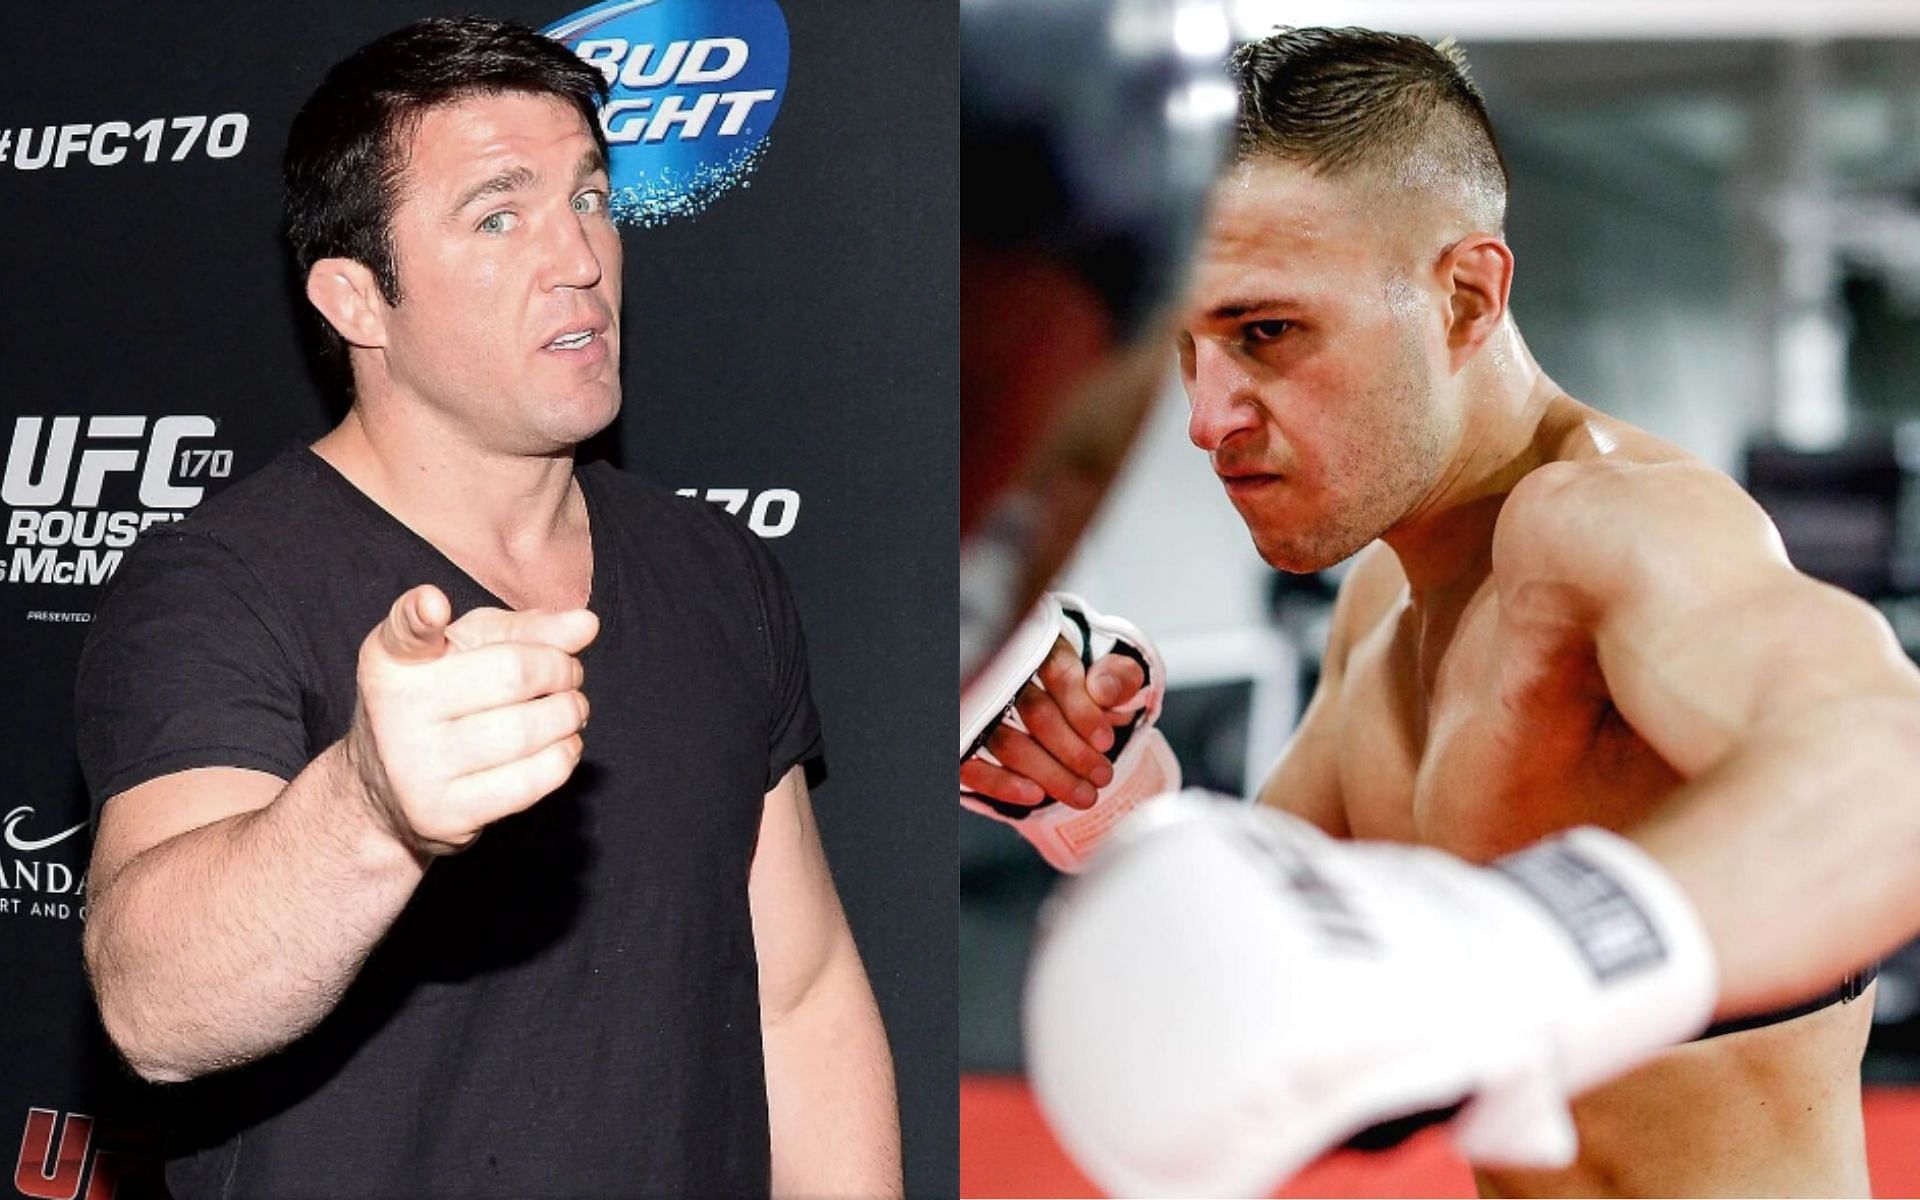 Chael Sonnen (left) says Kai Kara-France (right) should be fighting for the flyweight title [Images courtesy: Getty and @kaikarafrance via Instagram]